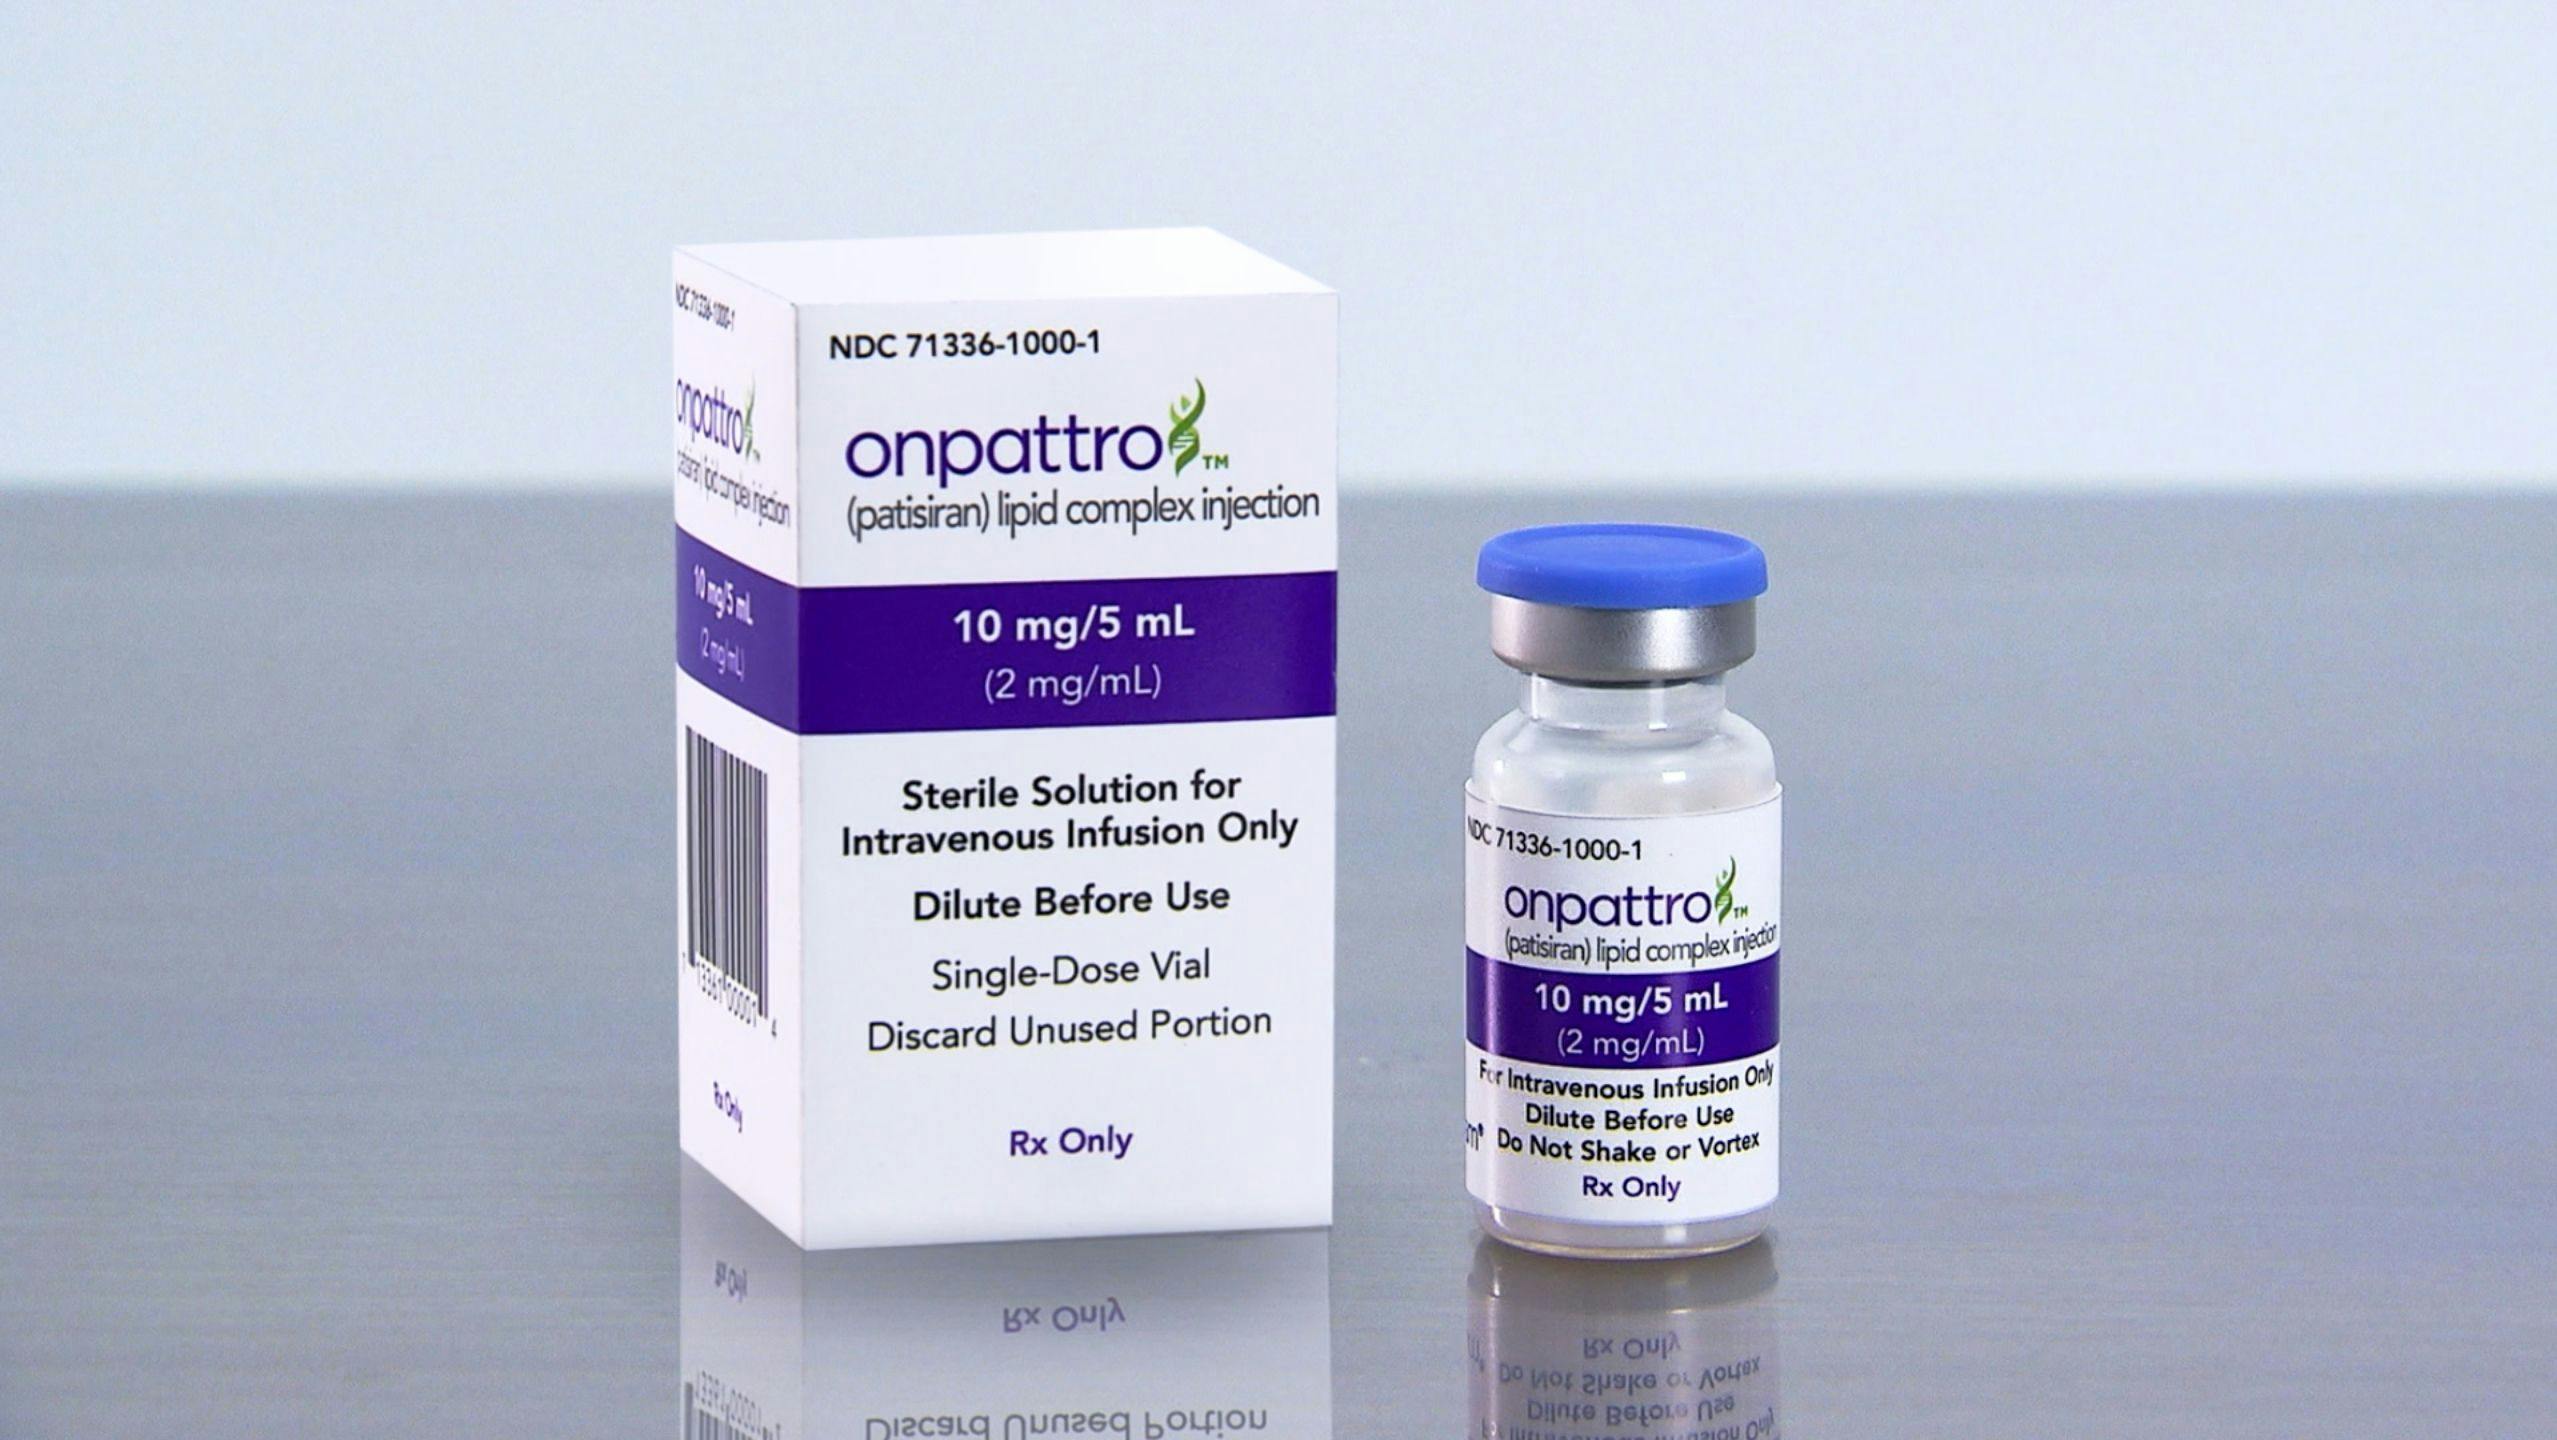 FDA Issues Complete Response Letter for Onpattro in Heart Failure Indication